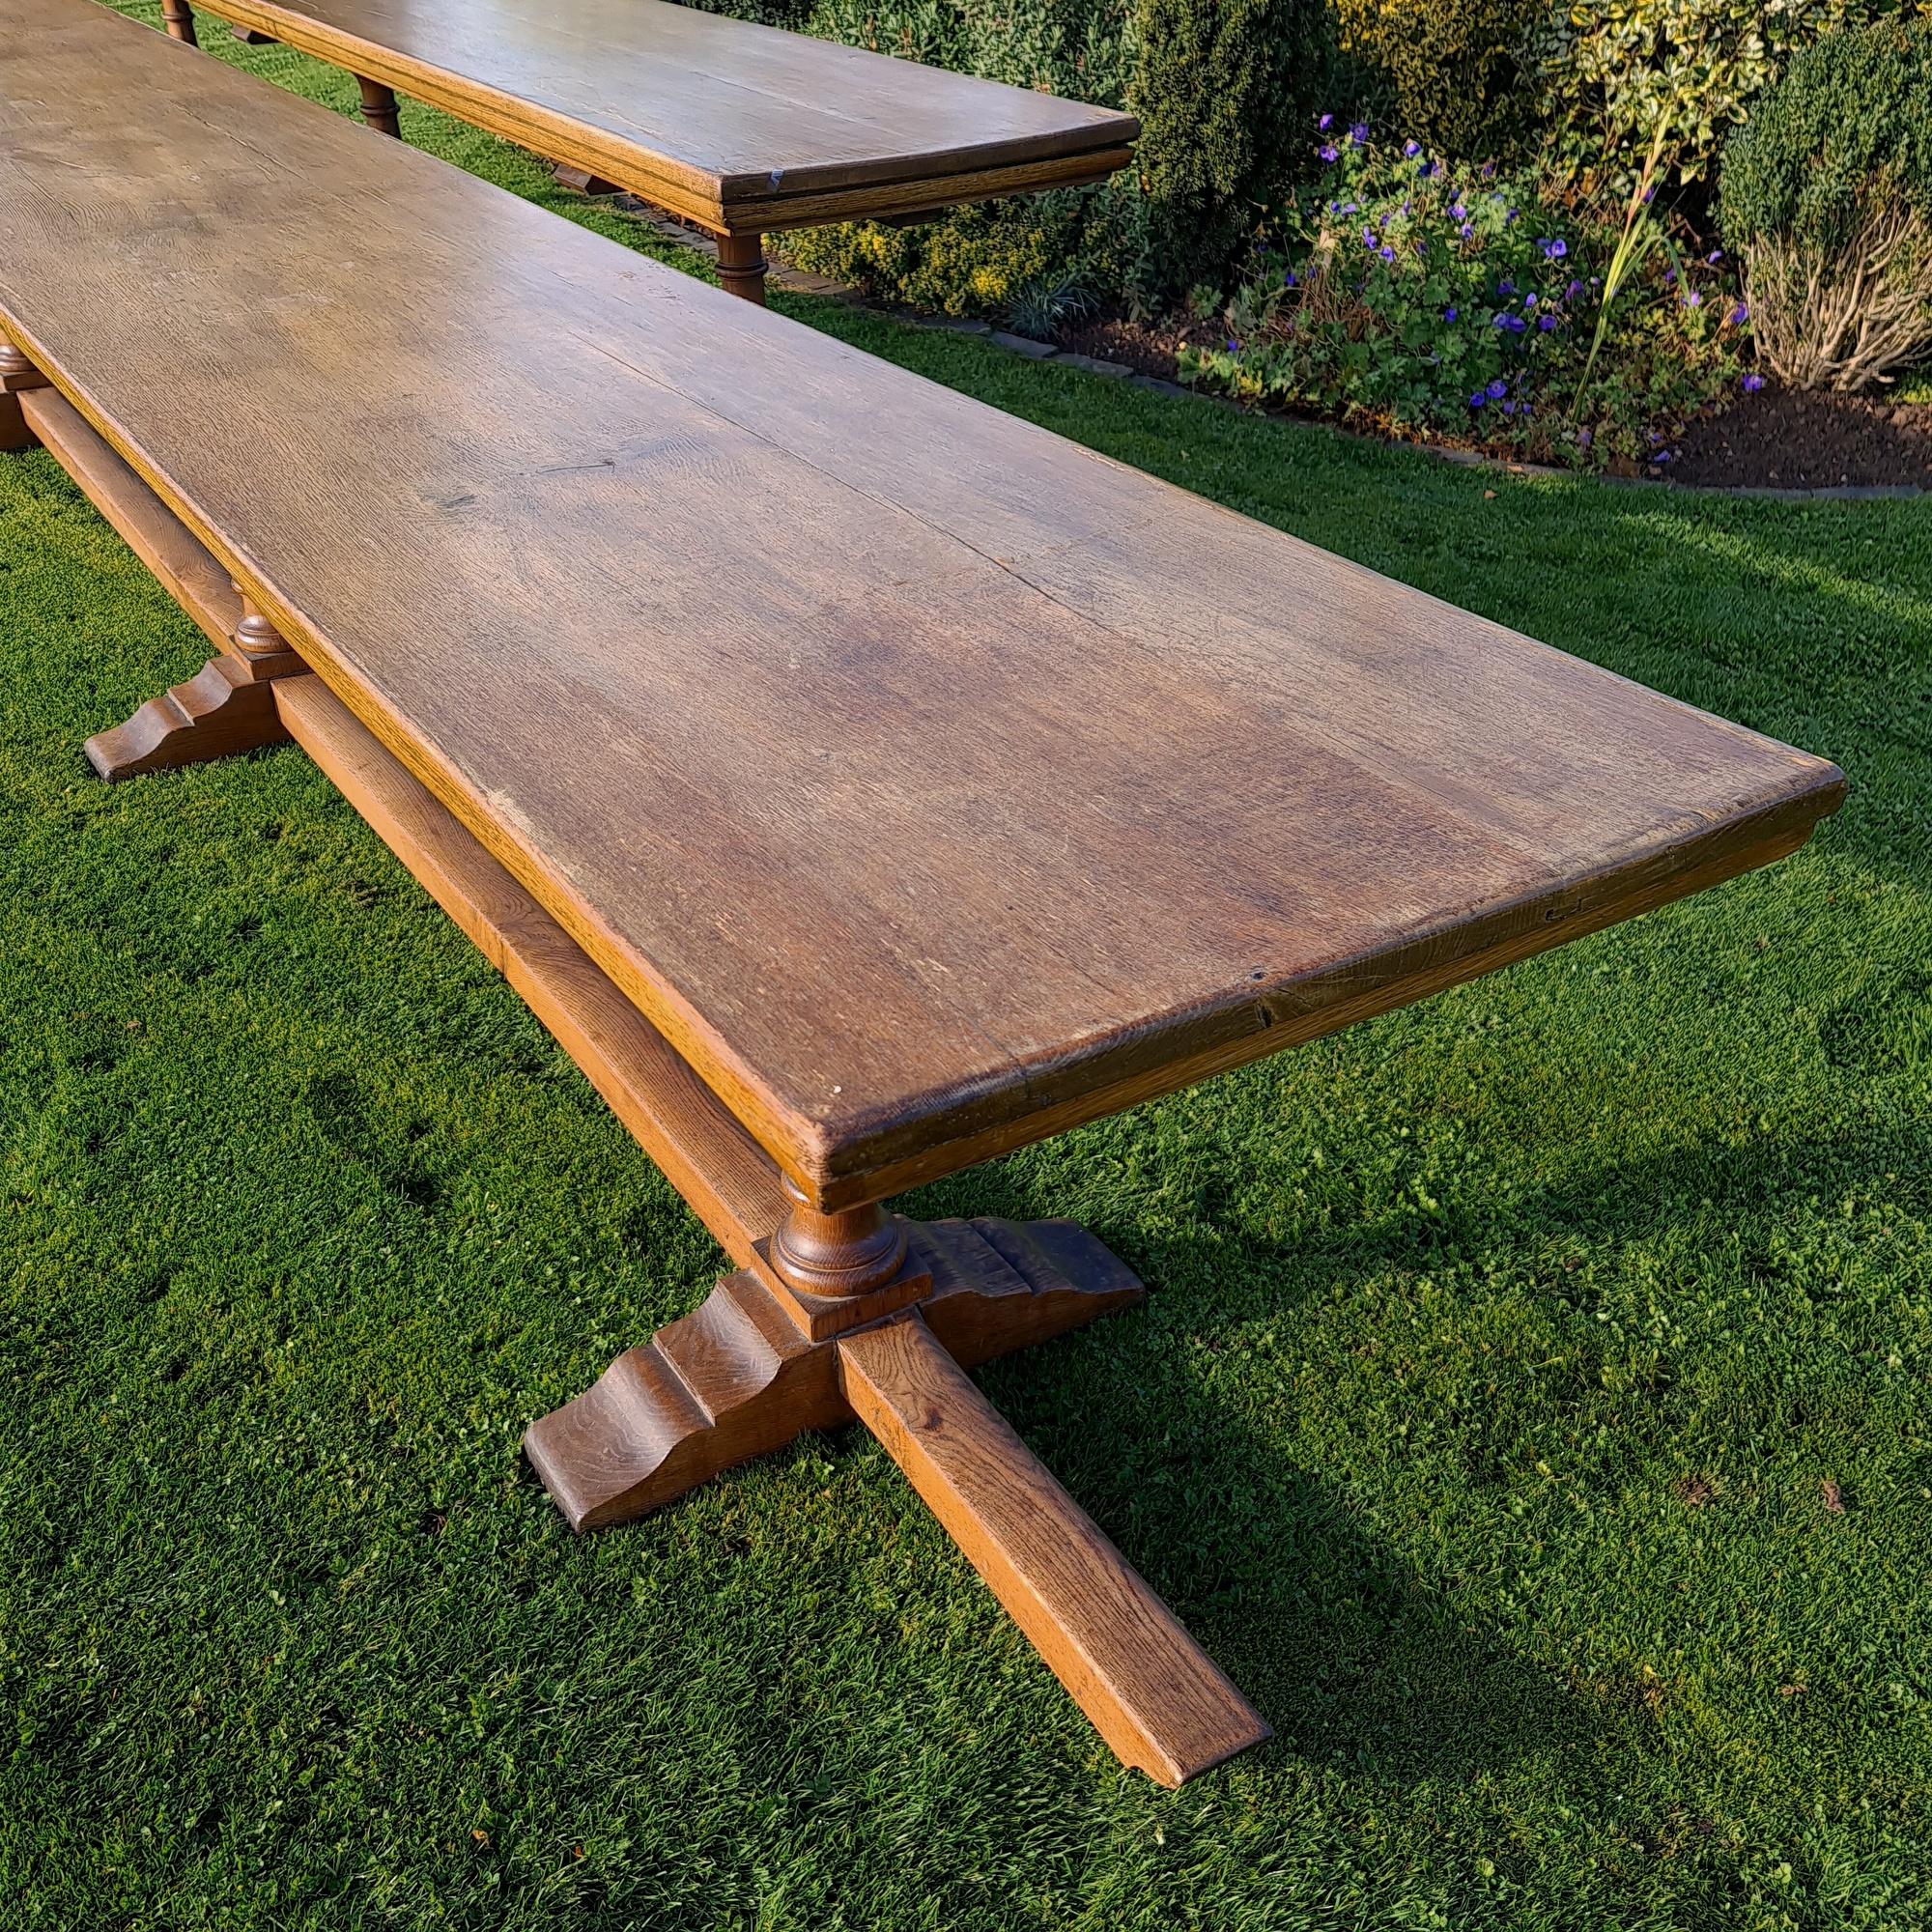 Stunning pair of huge 19th century English oak trestle tables.
Can sell individually or as a pair.



Dimensions
197 inches (500 cms) wide
26 inches (66 cms) deep
33.5 inches (85 cms) high.